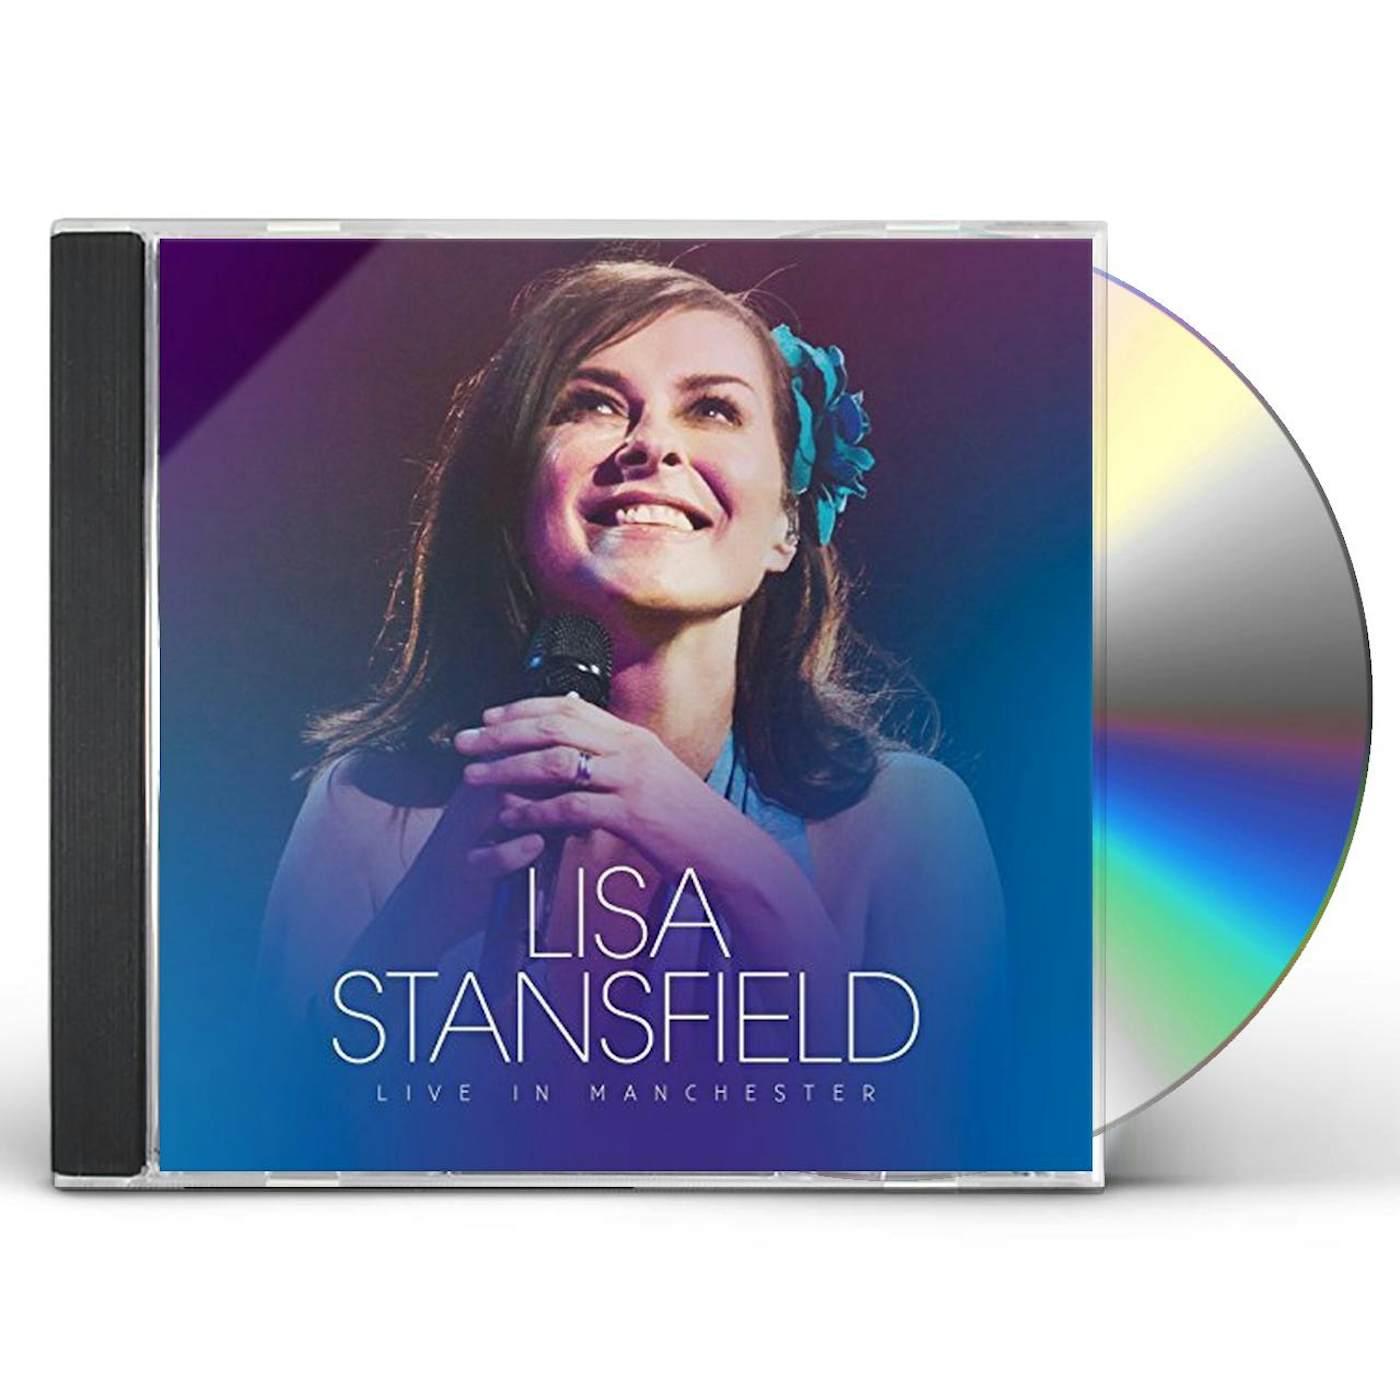 Lisa Stansfield LIVE IN MANCHESTER CD